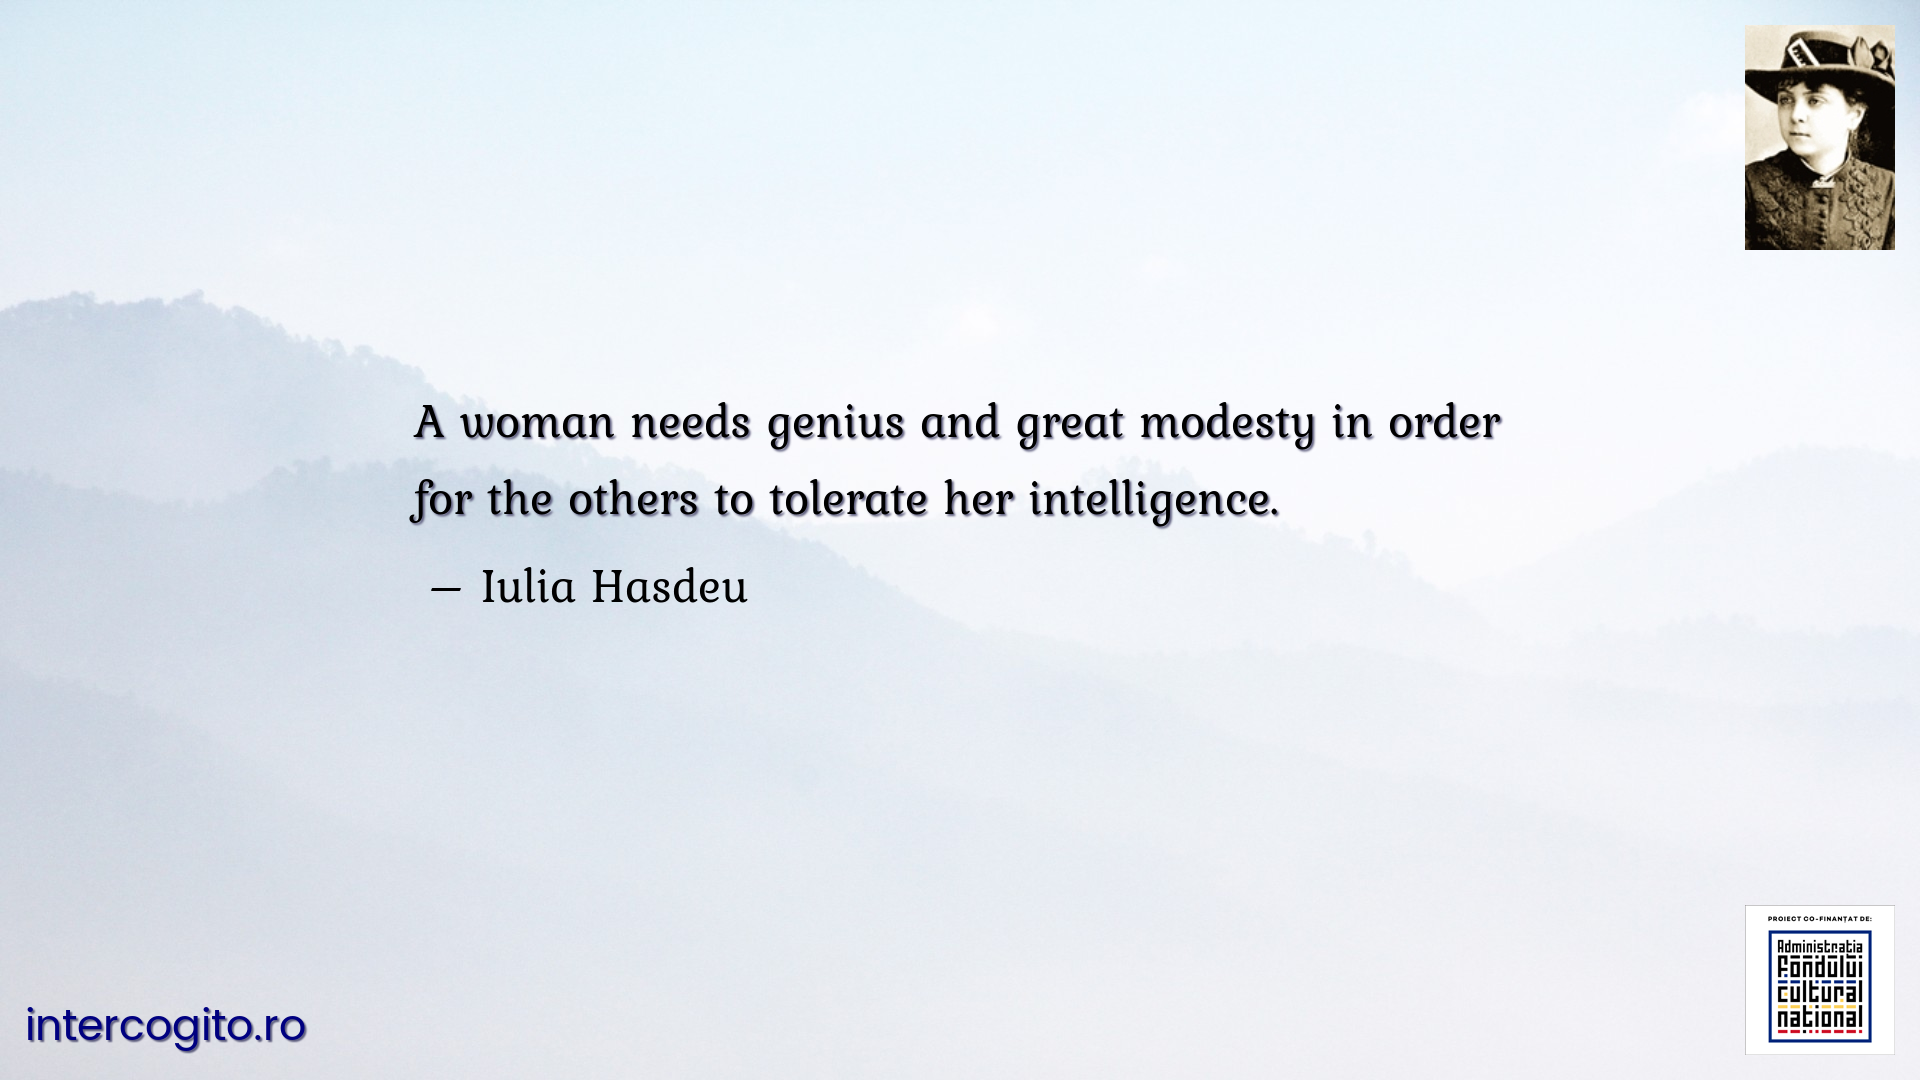 A woman needs genius and great modesty in order for the others to tolerate her intelligence.